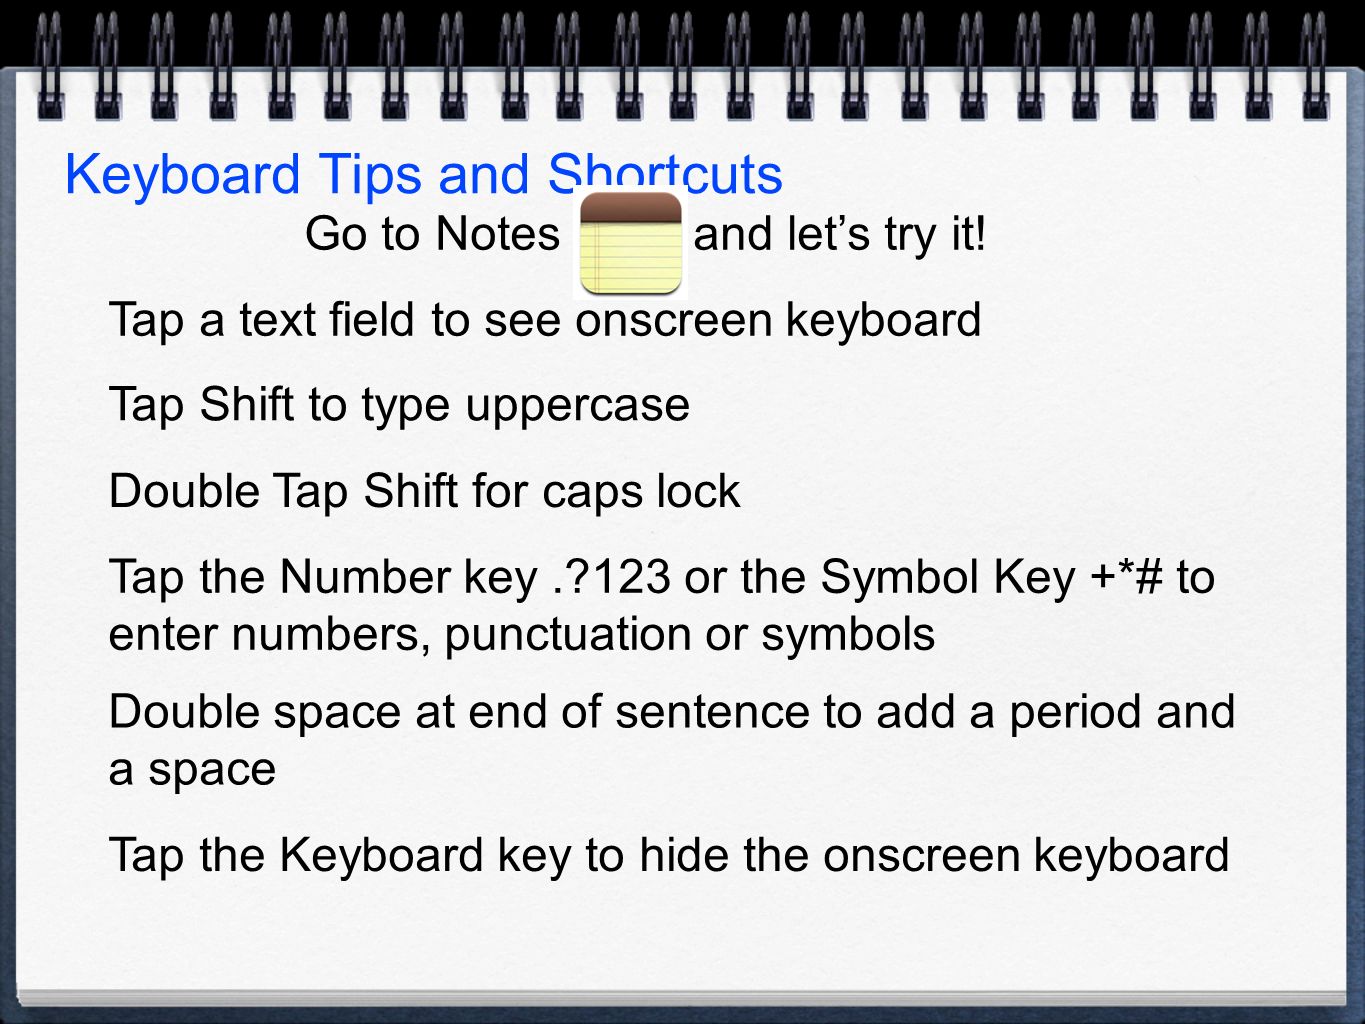 Keyboard Tips and Shortcuts Tap a text field to see onscreen keyboard Tap Shift to type uppercase Double Tap Shift for caps lock Tap the Number key. 123 or the Symbol Key +*# to enter numbers, punctuation or symbols Double space at end of sentence to add a period and a space Tap the Keyboard key to hide the onscreen keyboard Go to Notes and let’s try it!